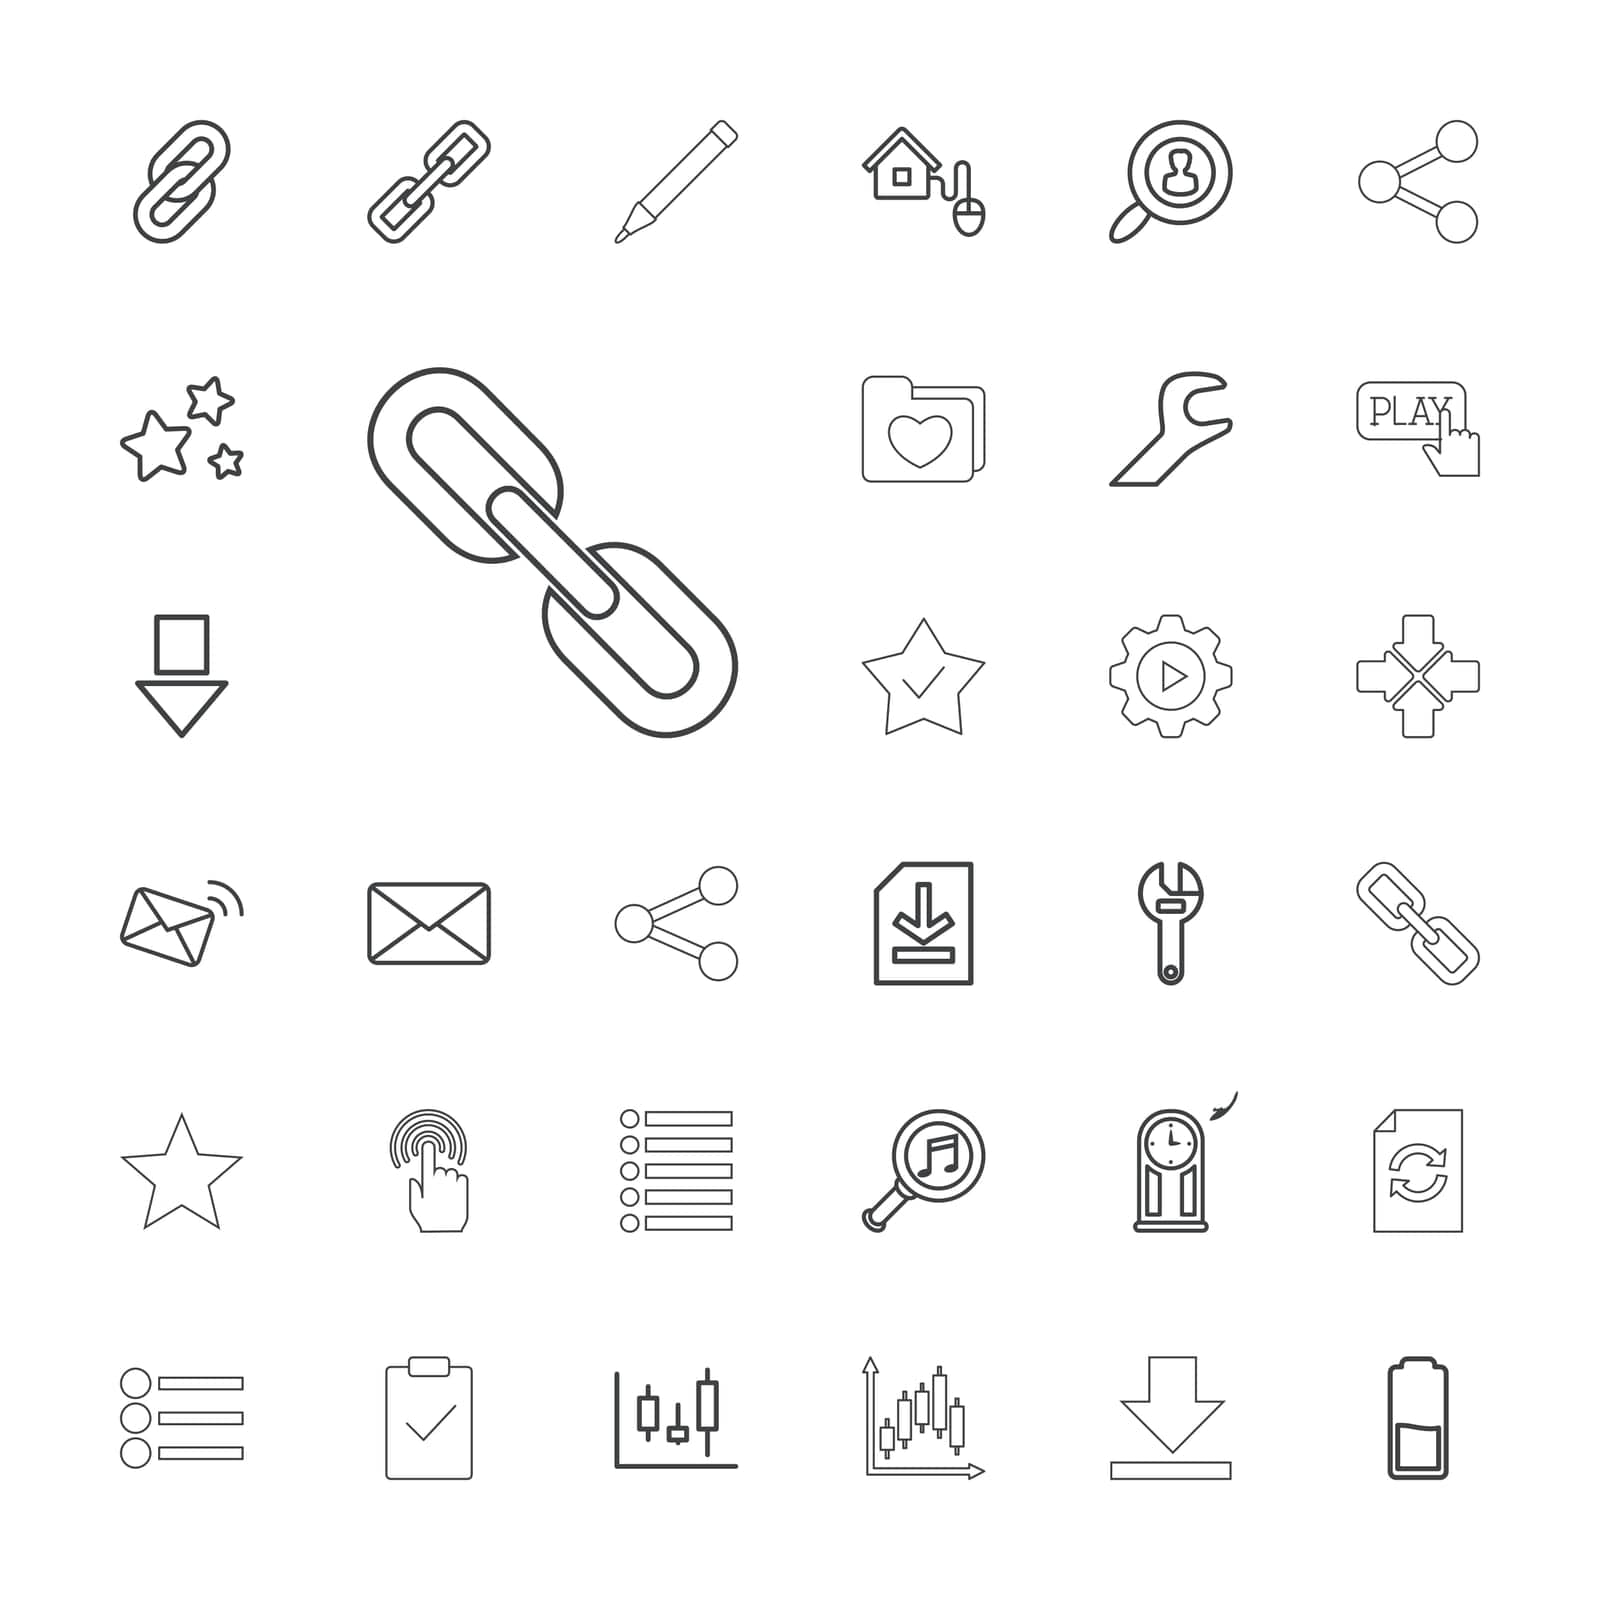 play,symbol,mail,arrow,icon,sign,link,battery,interface,down,clipboard,smart,button,download,search,pressing,music,file,reload,pen,share,vector,panel,pendulum,finger,chain,move,set,star,in,serach,control,touchscreen,tick,menu,heart,home,wrench,with,folder,user,gear